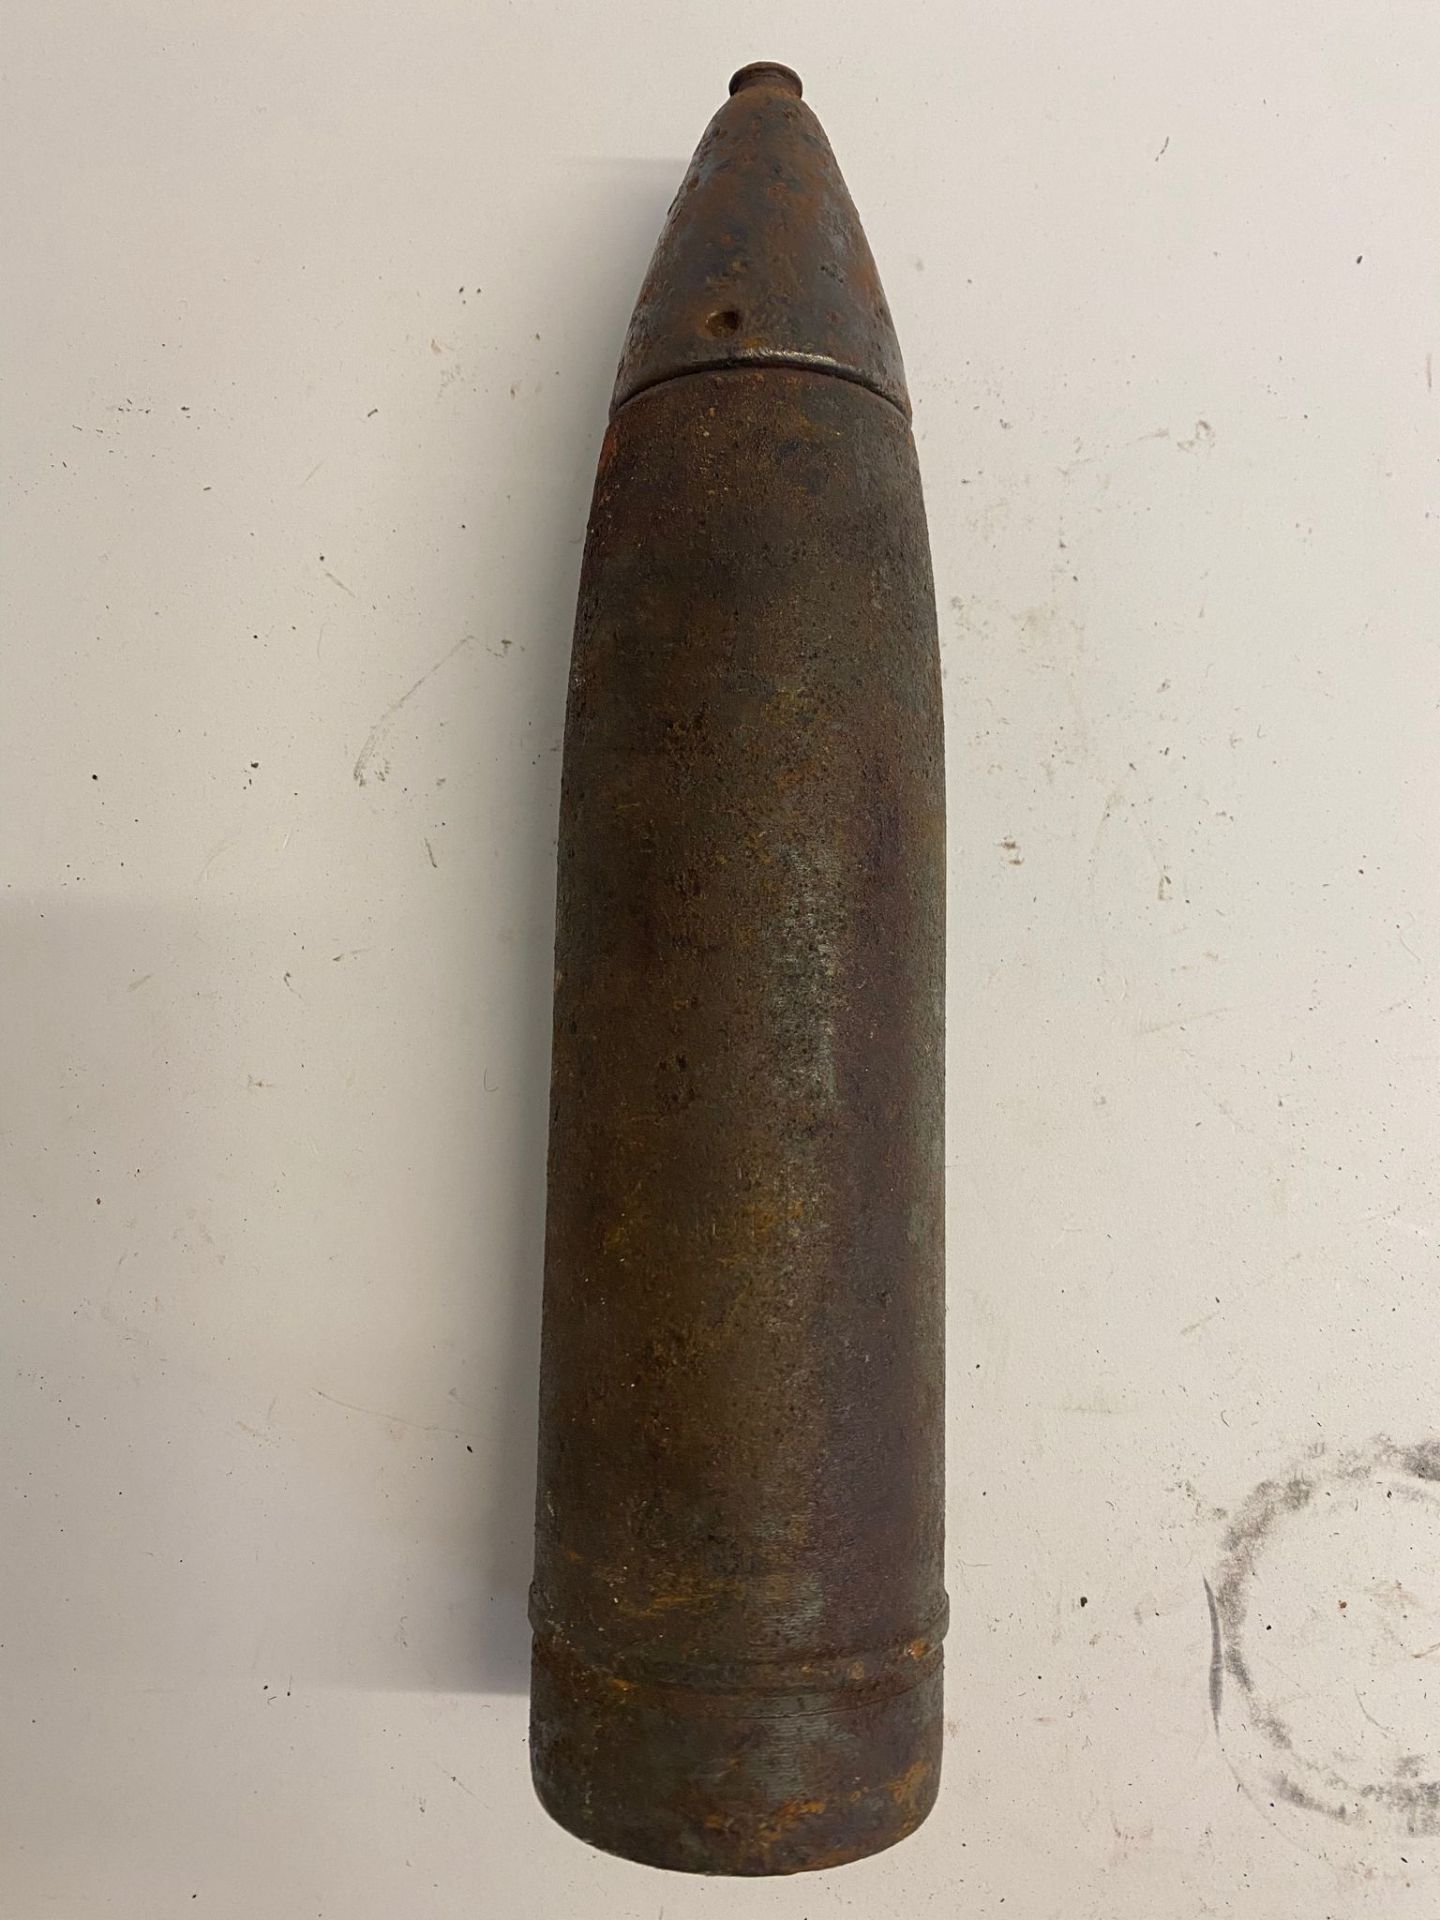 An inert WWII German Leig18HE projectile with an az1 fuse. This lot will be available to collect